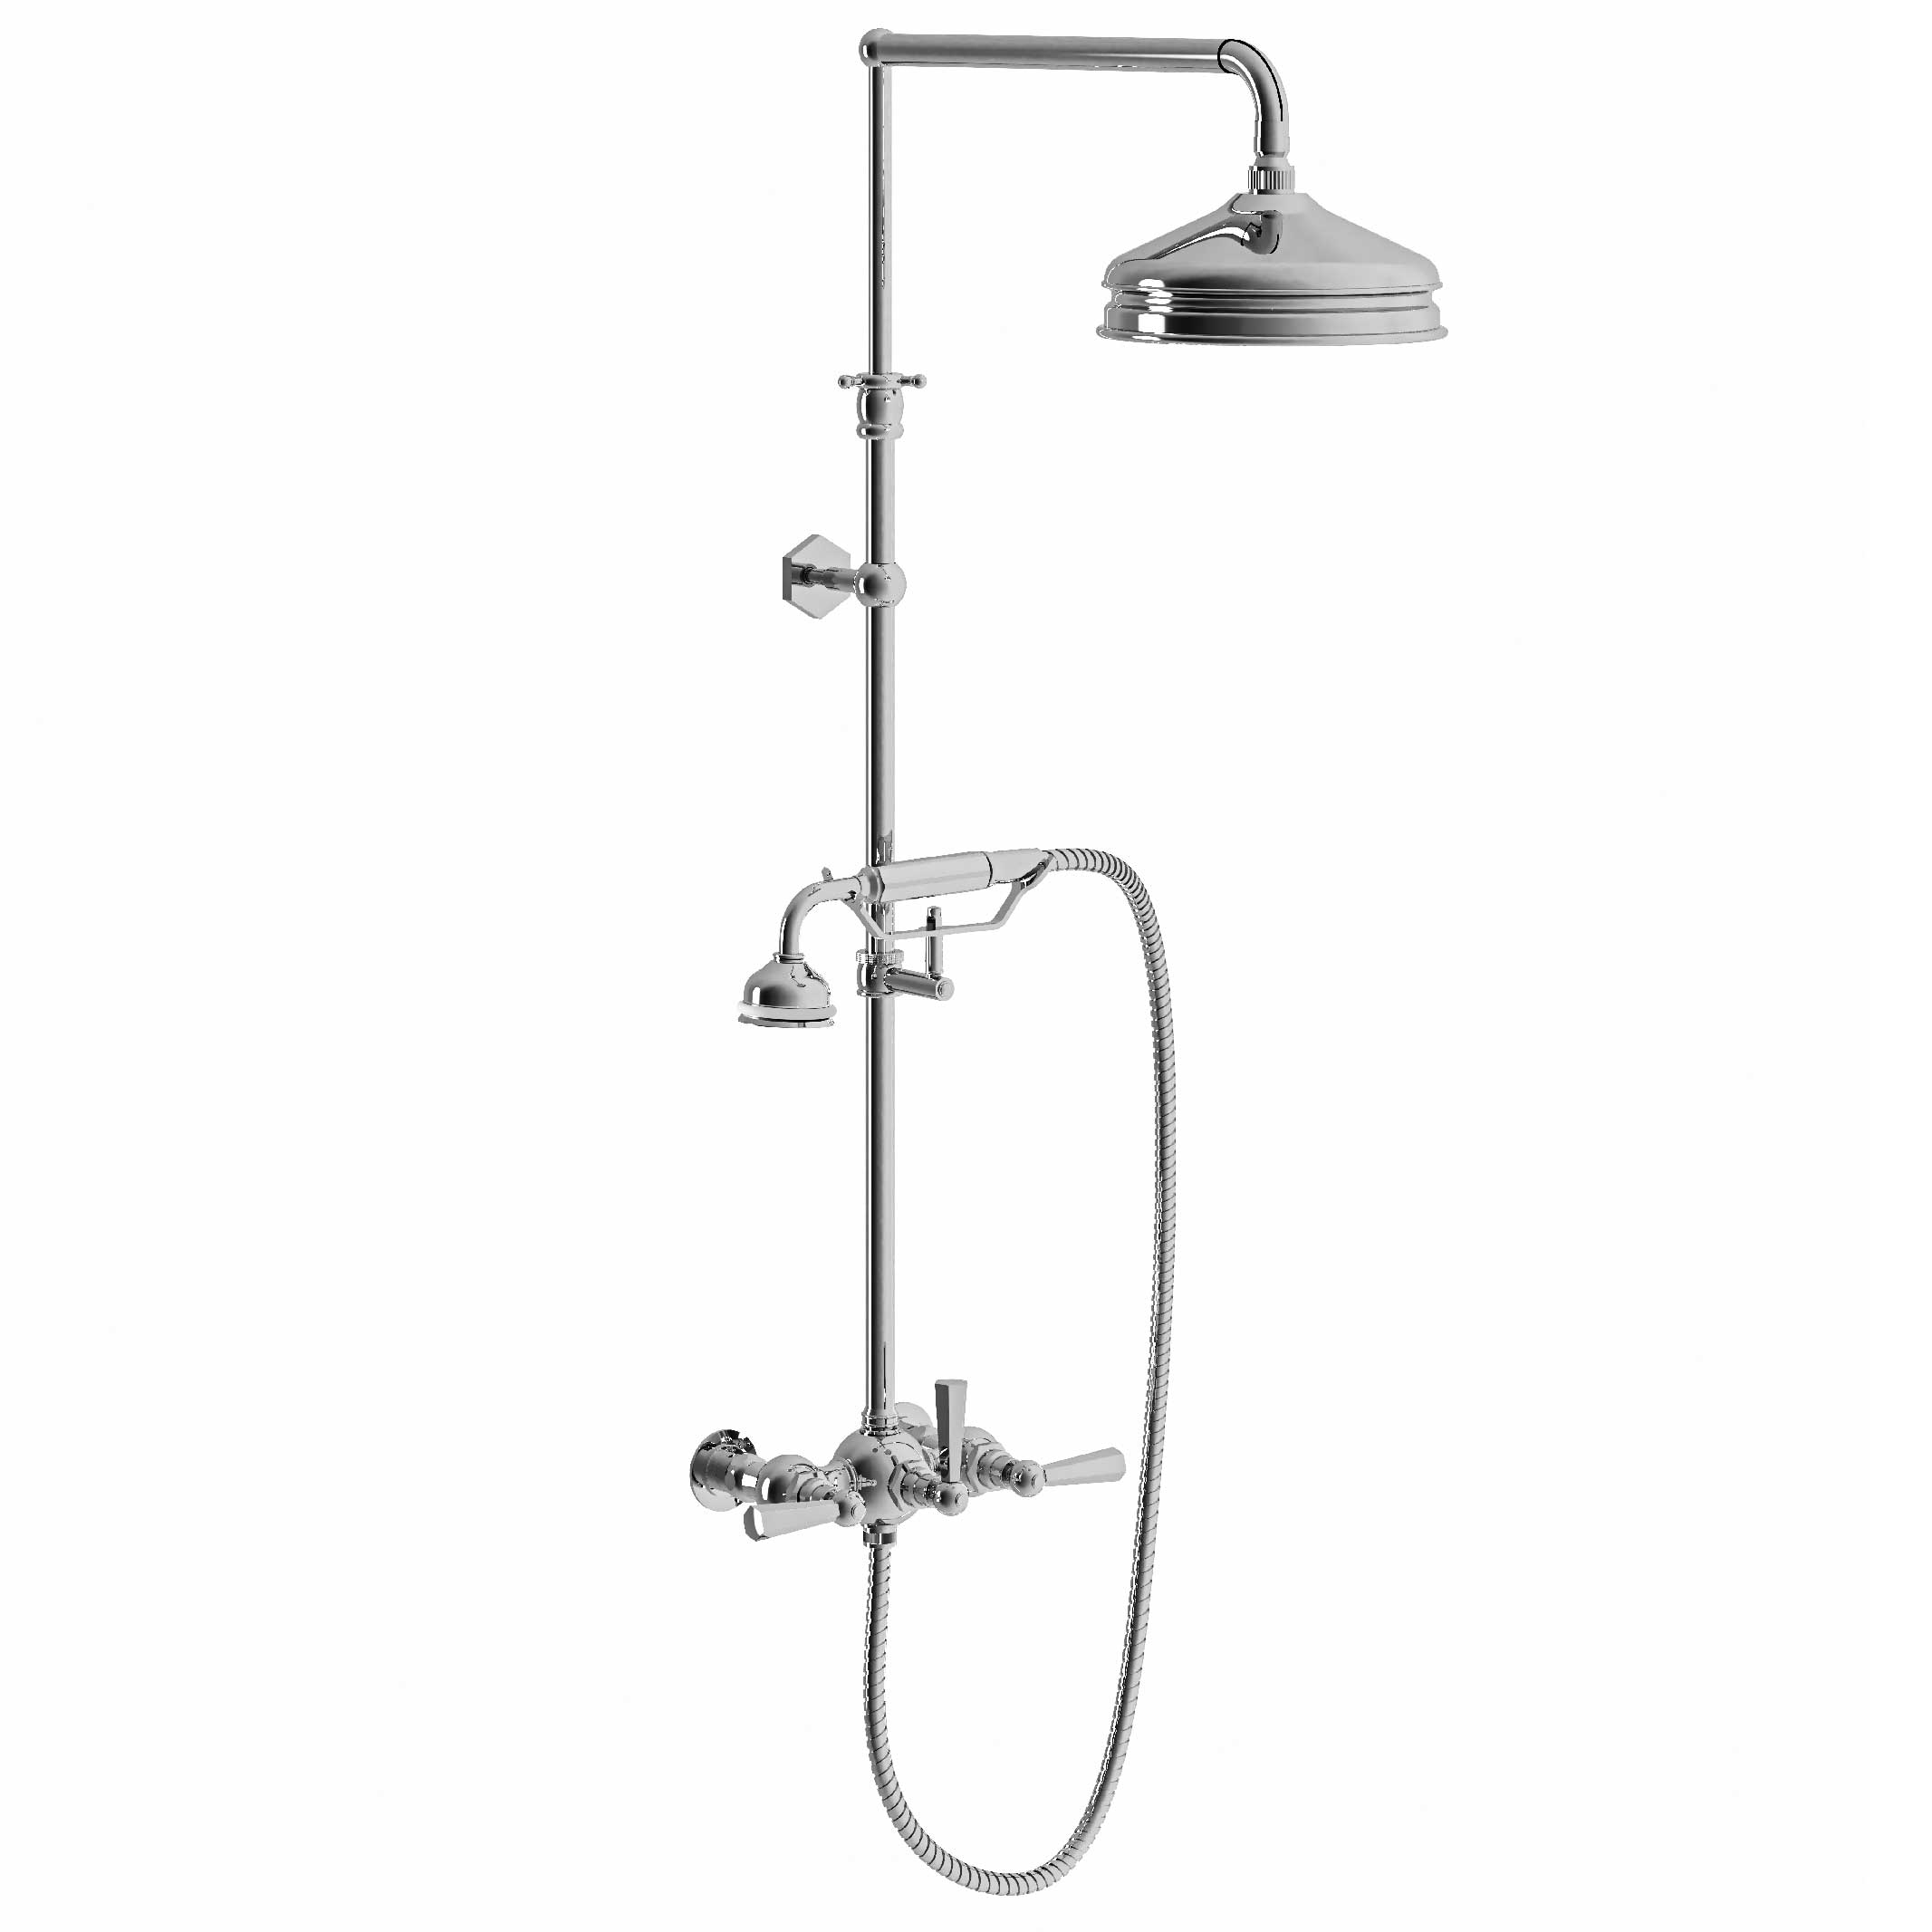 M39-2204 Shower mixer with column, anti-scaling